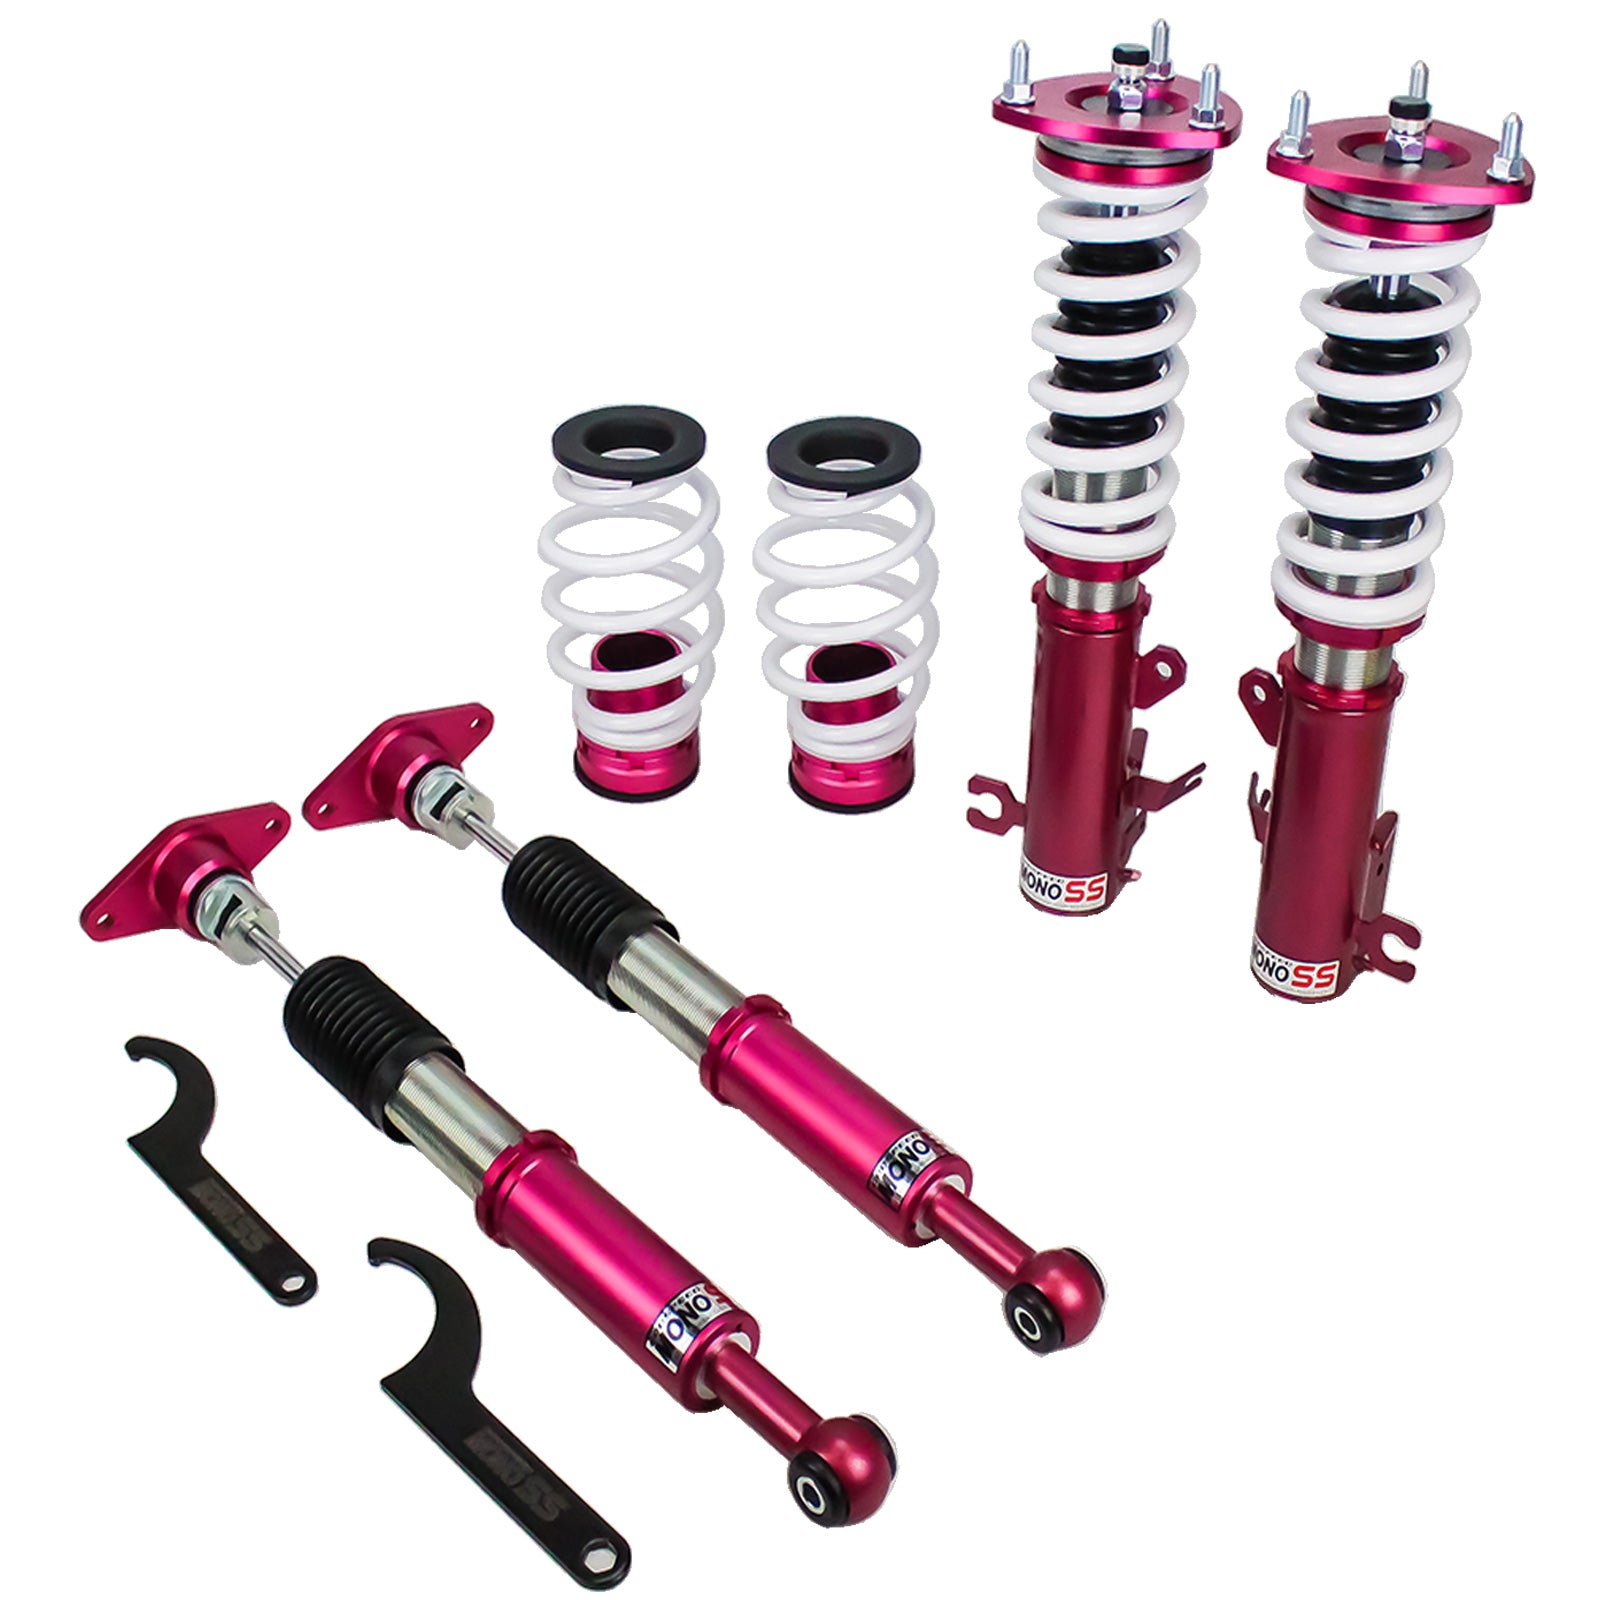 Godspeed MSS0123-A MonoSS Coilover Lowering Kit, Fully Adjustable, Ride Height, Spring Tension And 16 Click Damping, Scion IA 2016/Toyota Yaris IA(DJ/DL) 2017-18